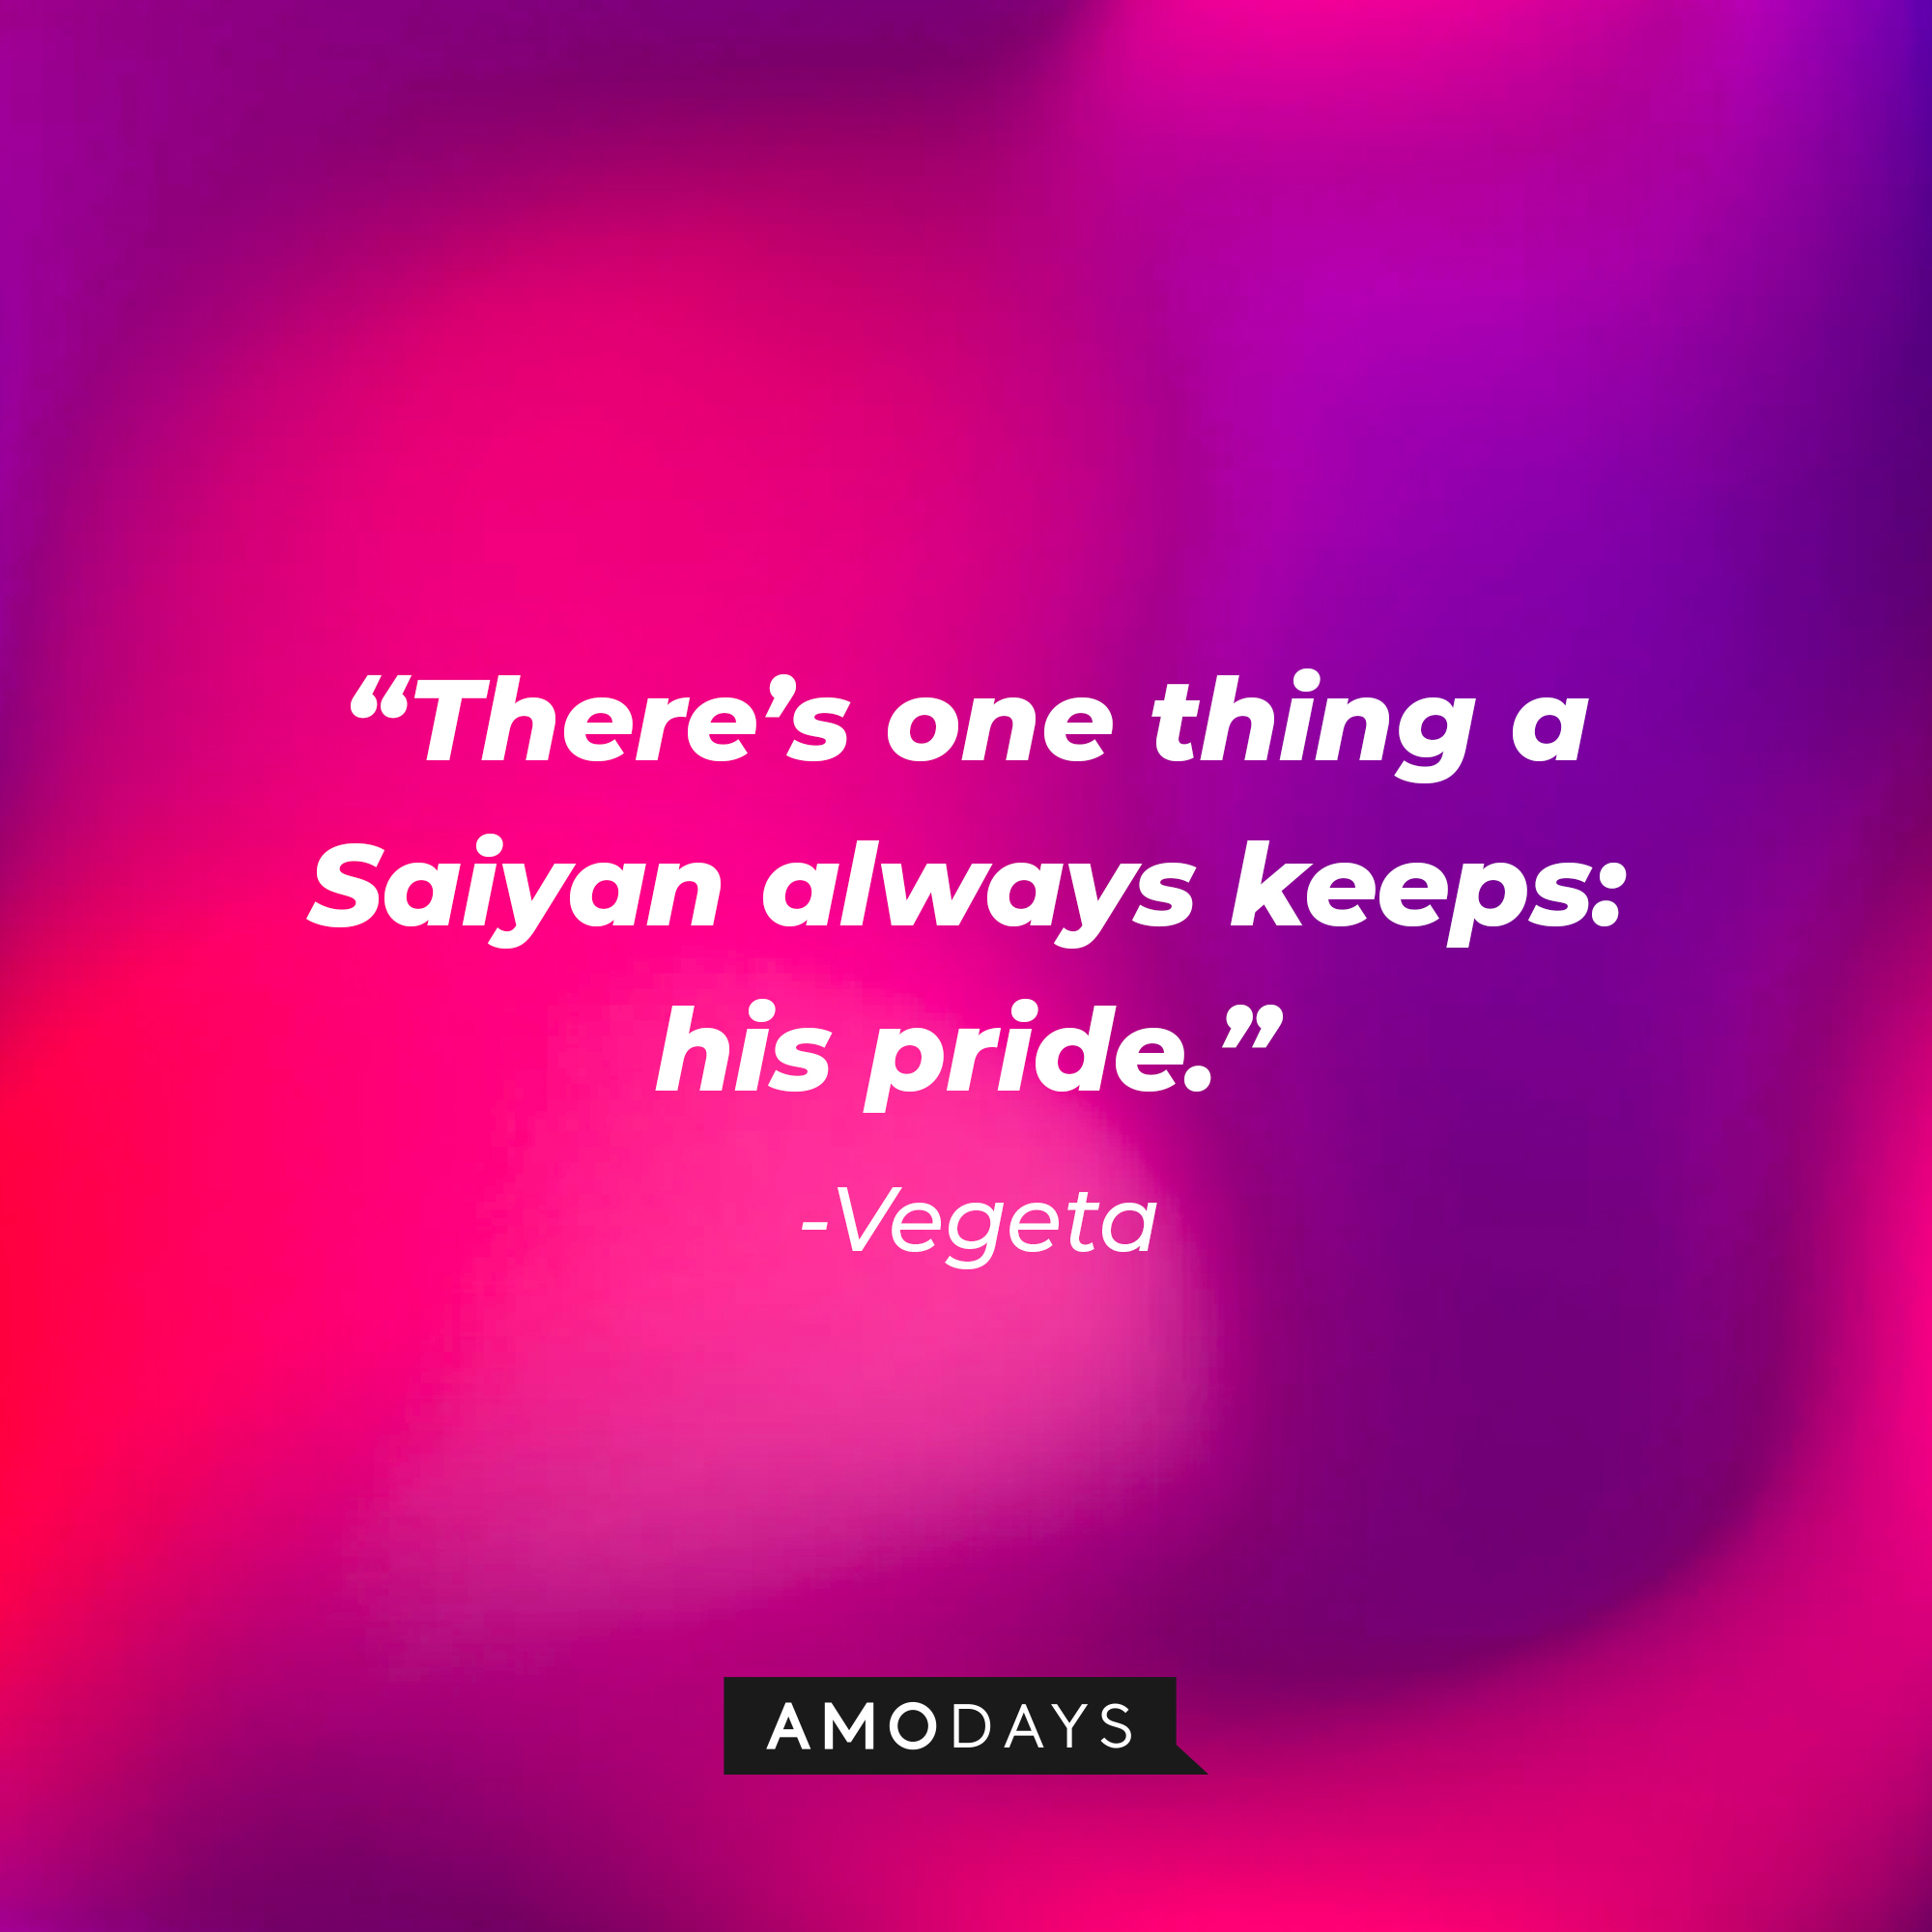 Vegeta’s quote: “There’s one thing a Saiyan always keeps: his pride.”  | Source: AmoDays